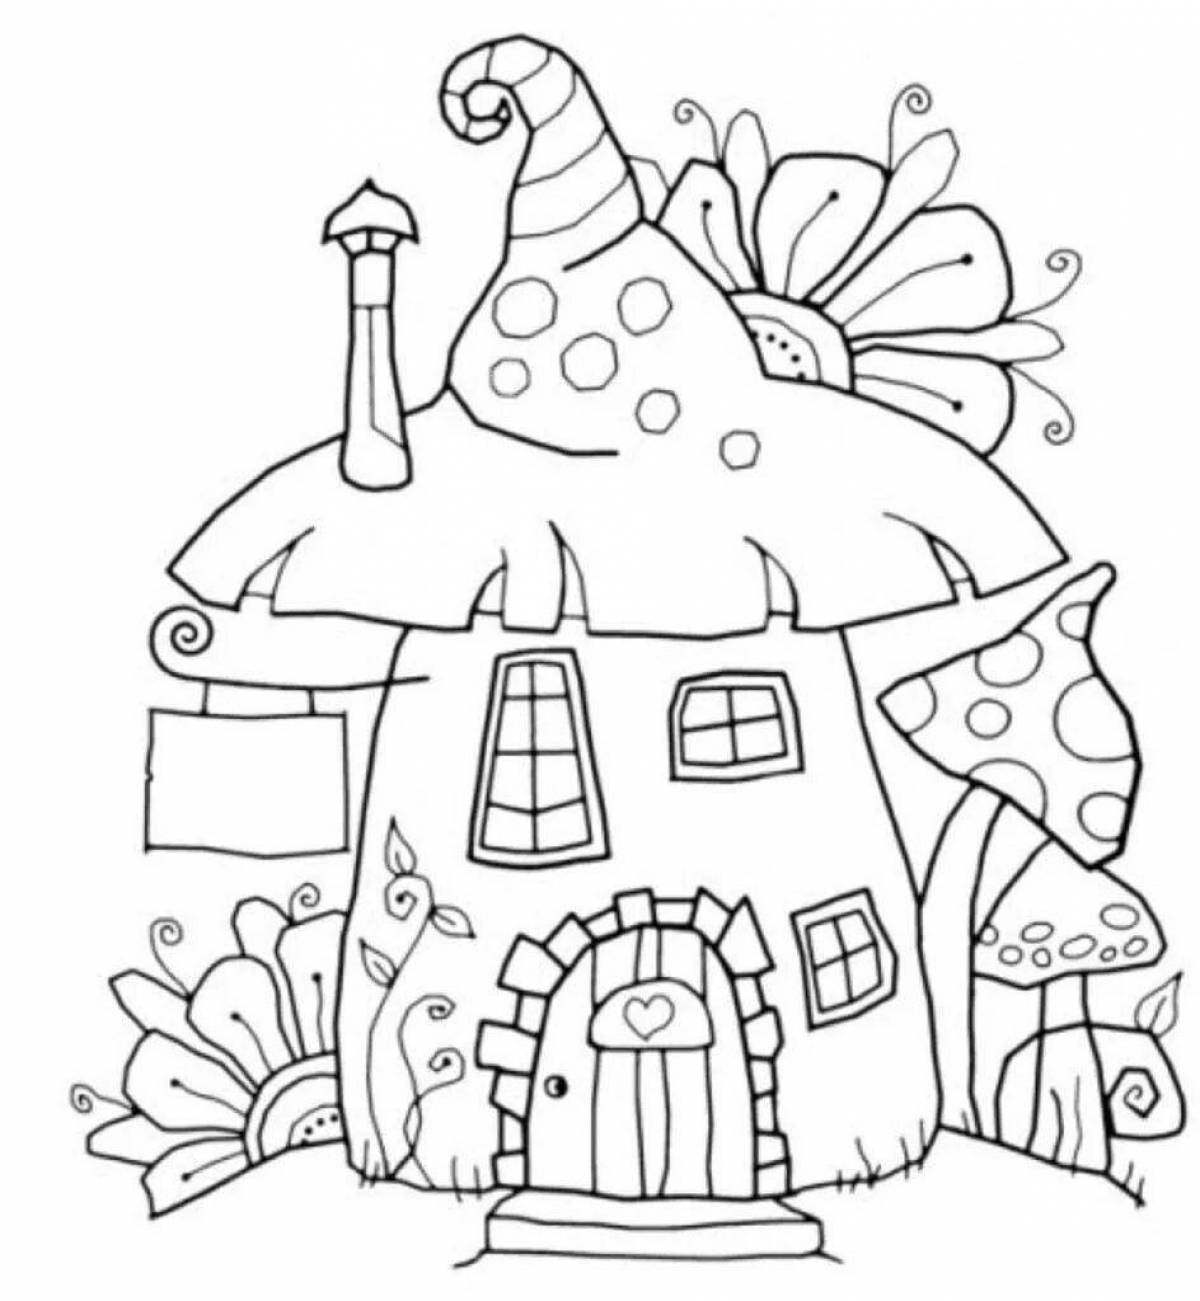 Charming fairy house coloring book